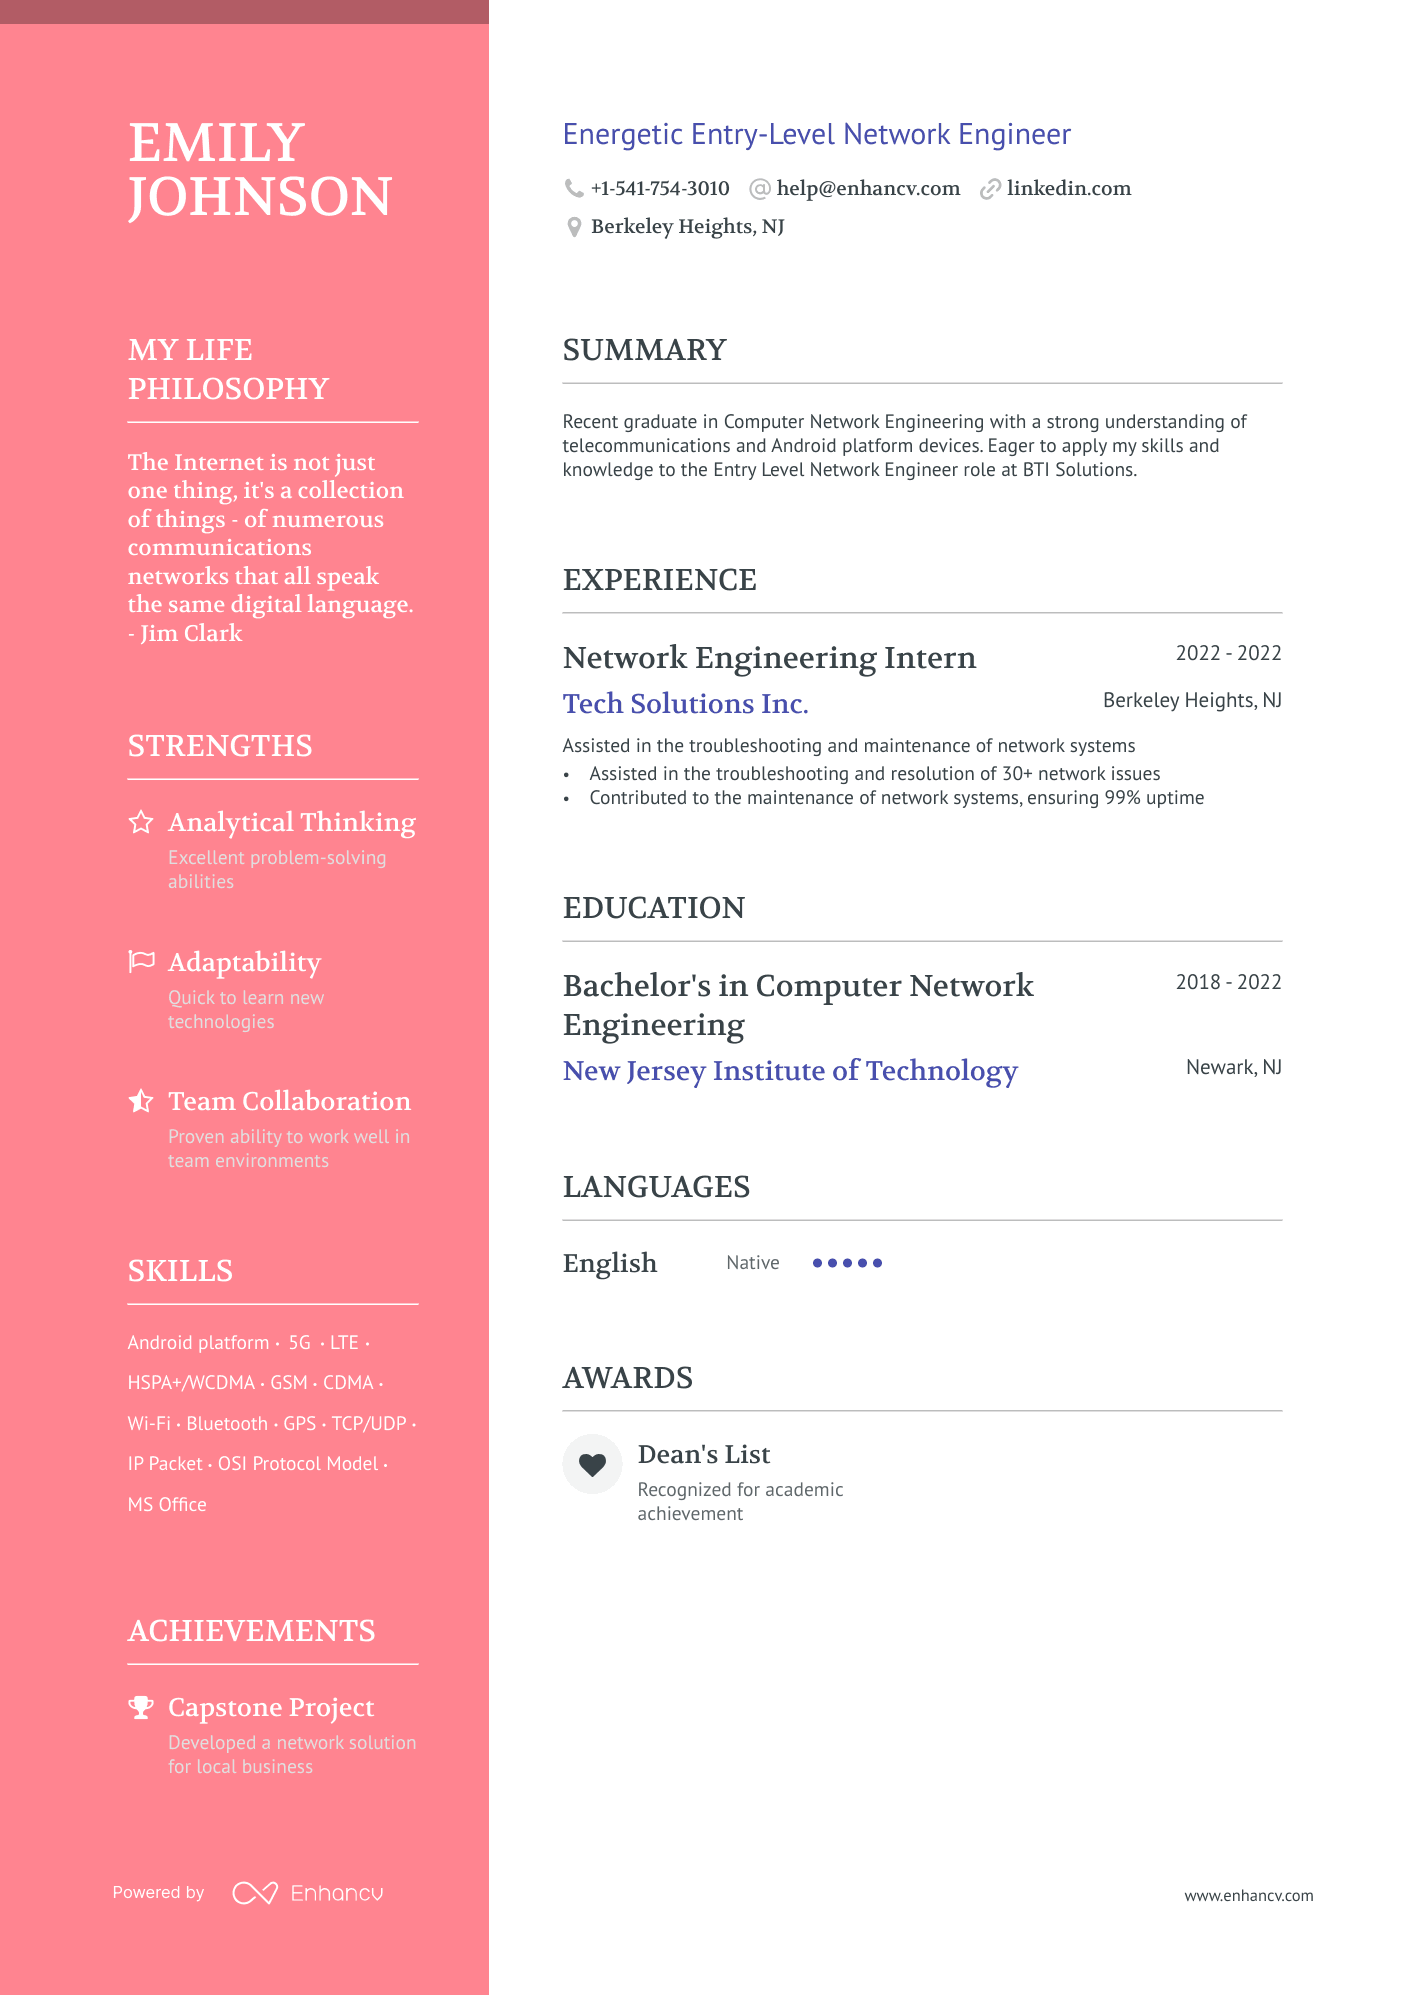 Entry Level Network Engineer resume example